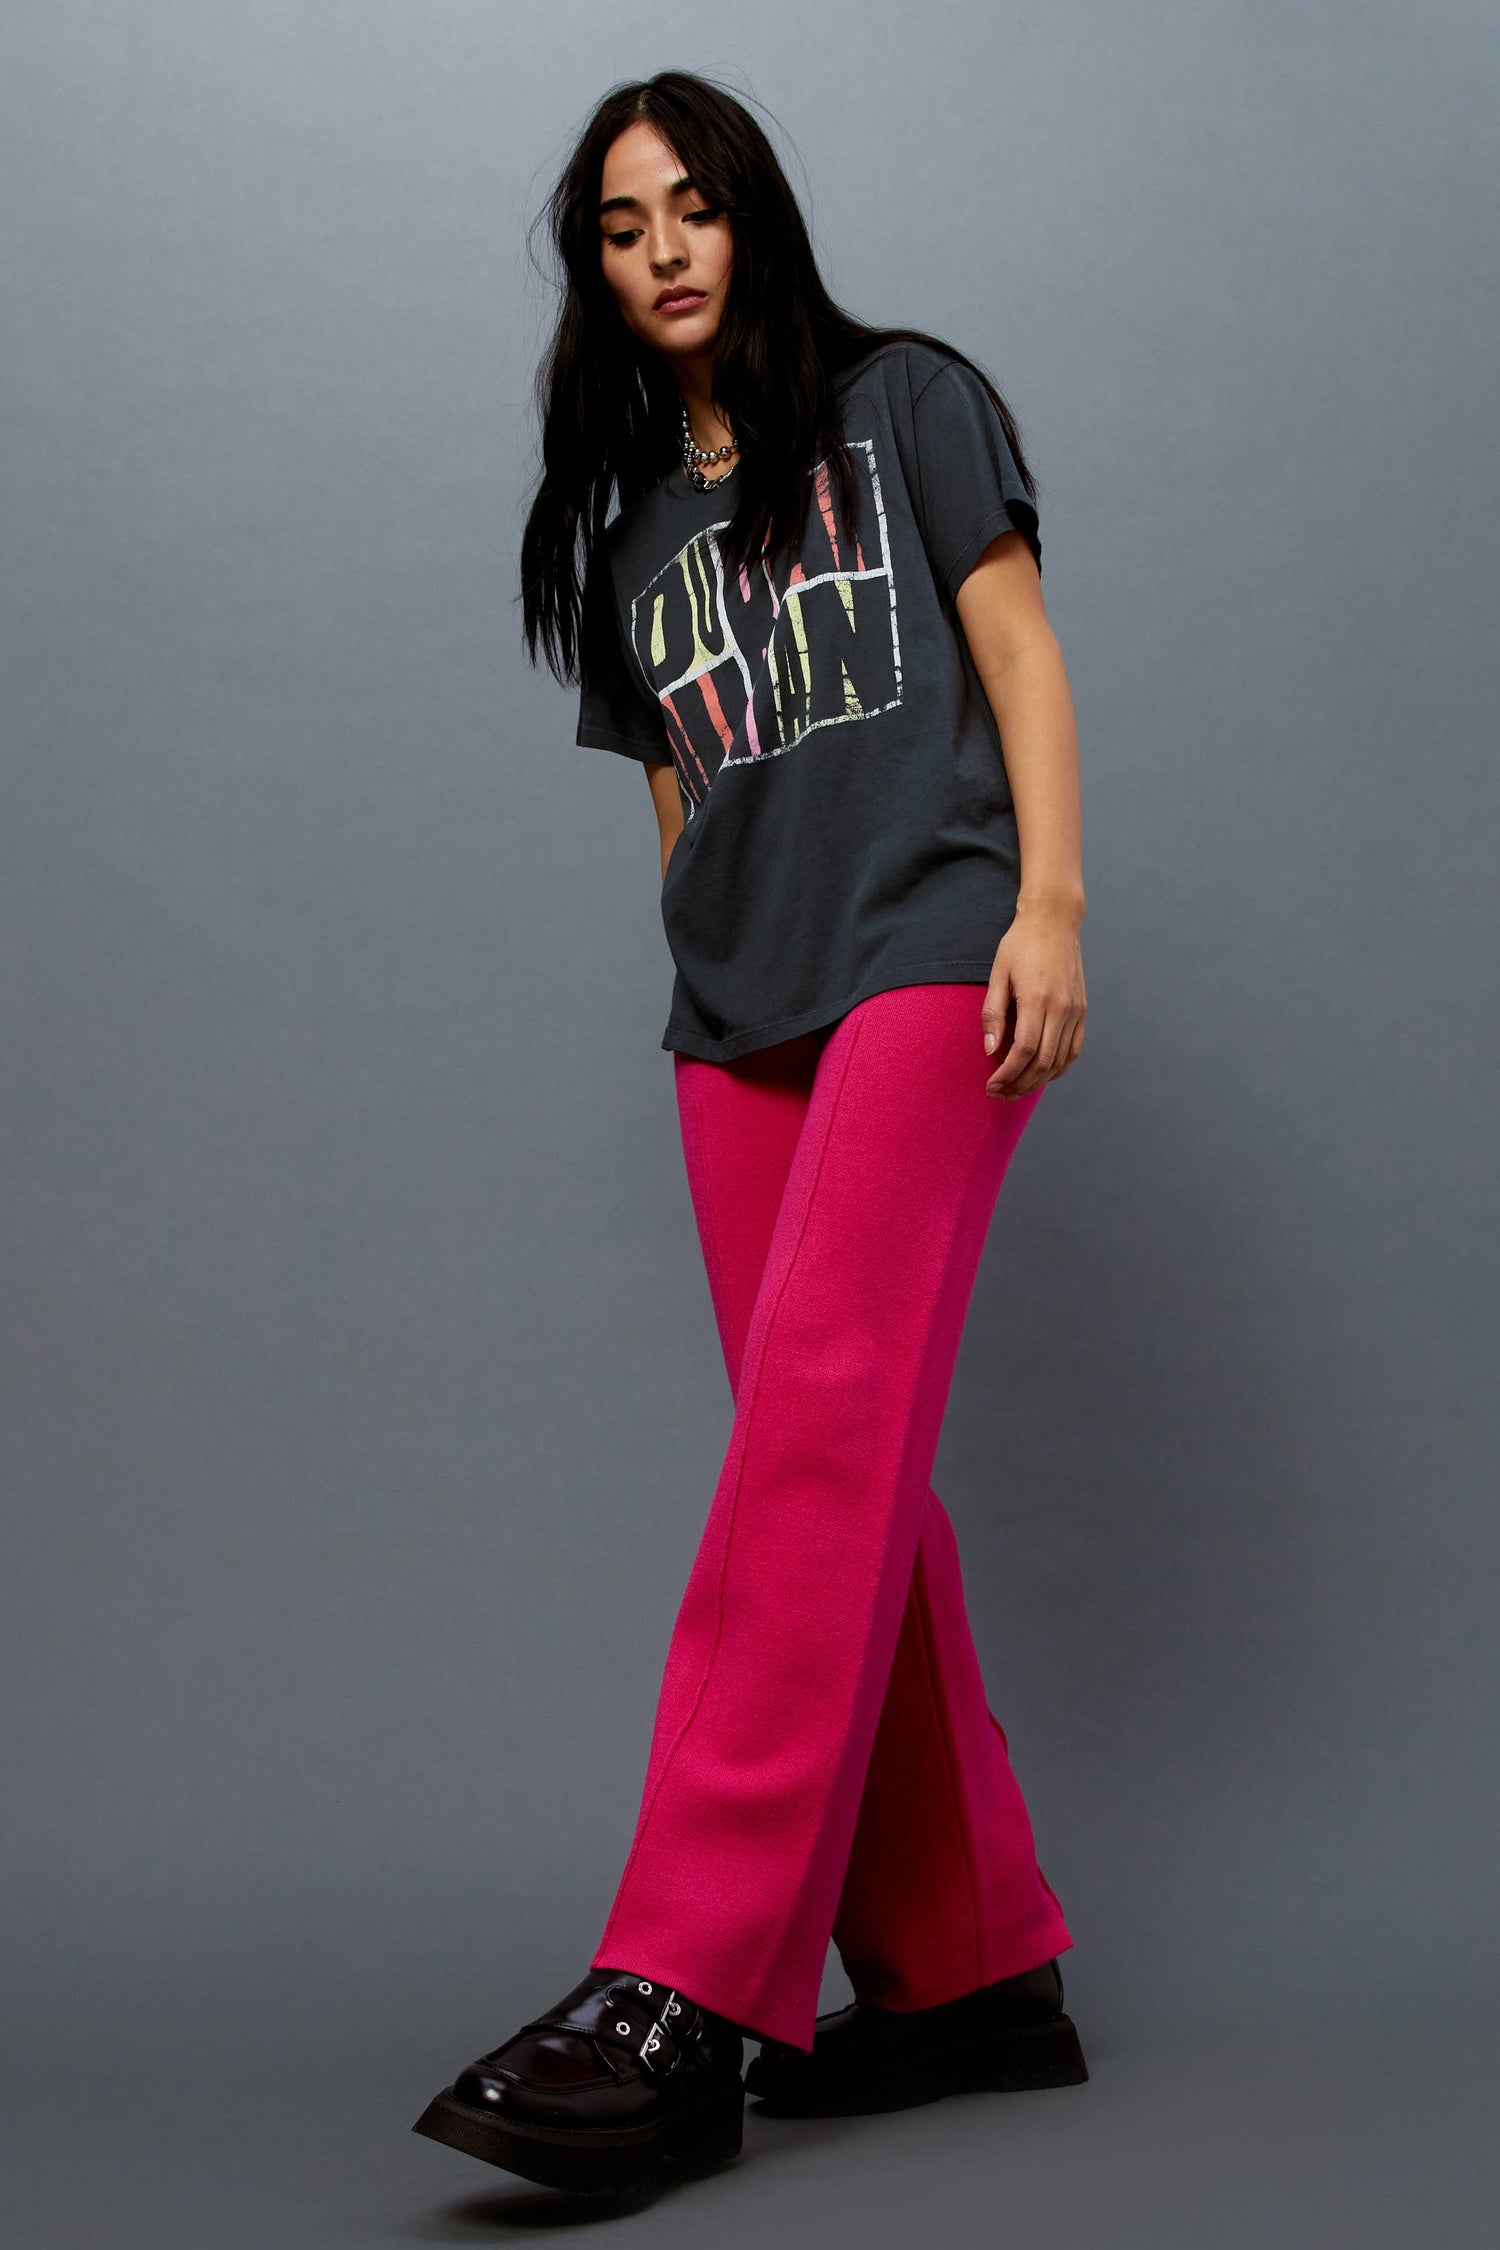 Model wearing a Duran Duran graphic tee styled with knit pintuck pants in pink rose